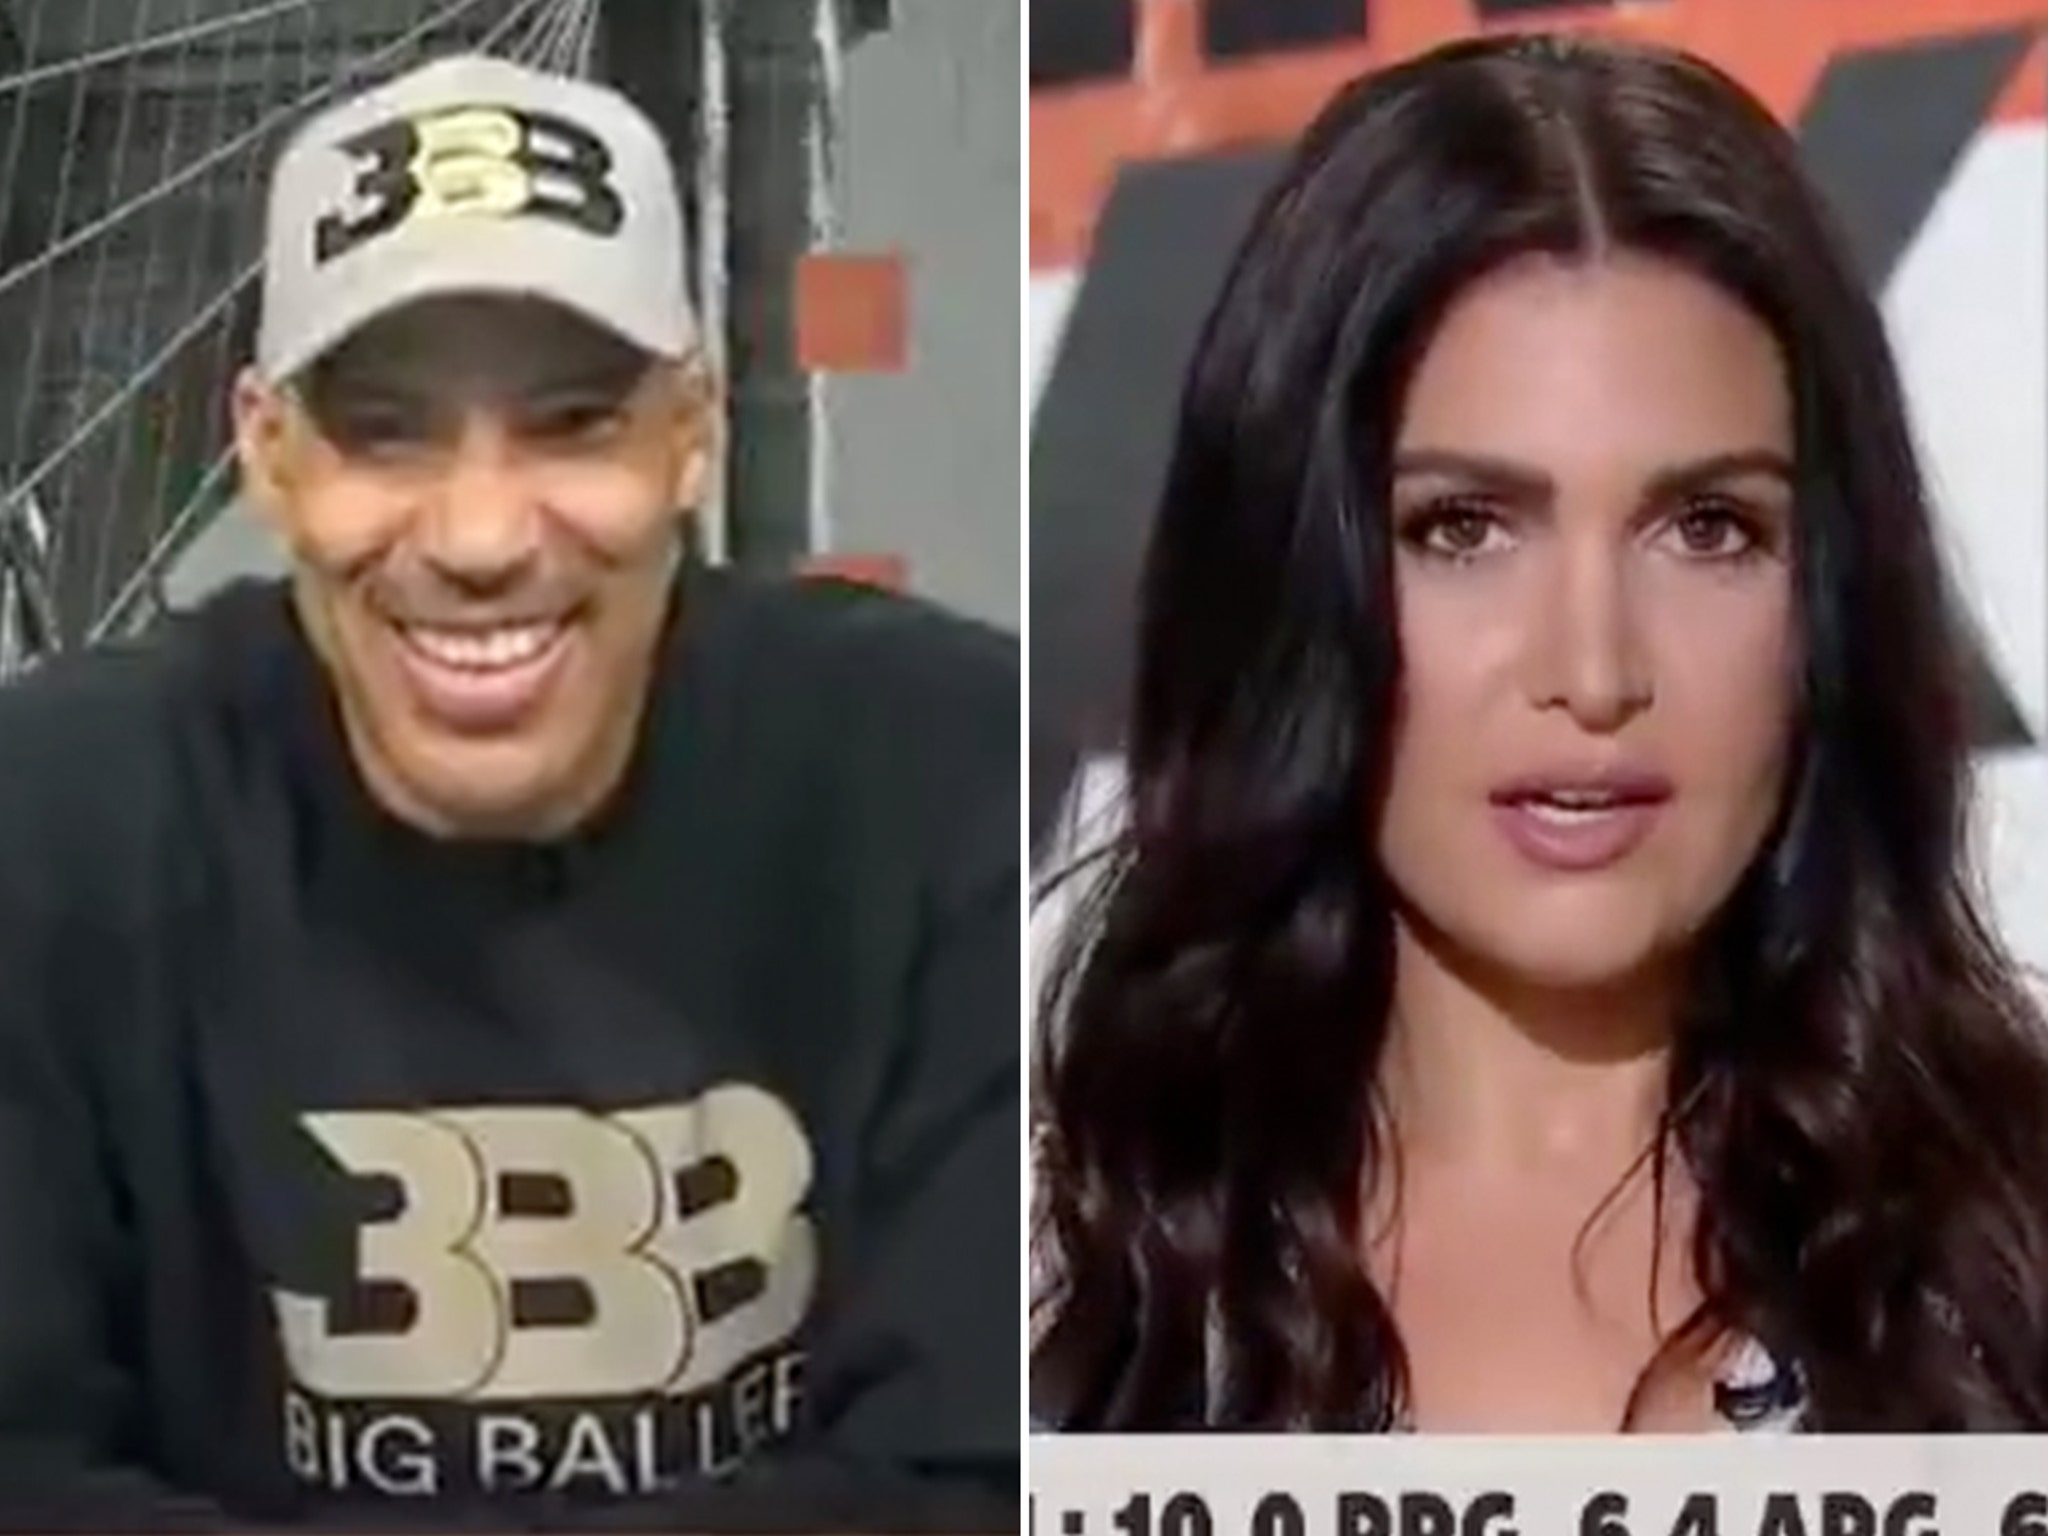 LaVar Ball Denies Making 'Sexual' Comments to ESPN's Molly Qerim